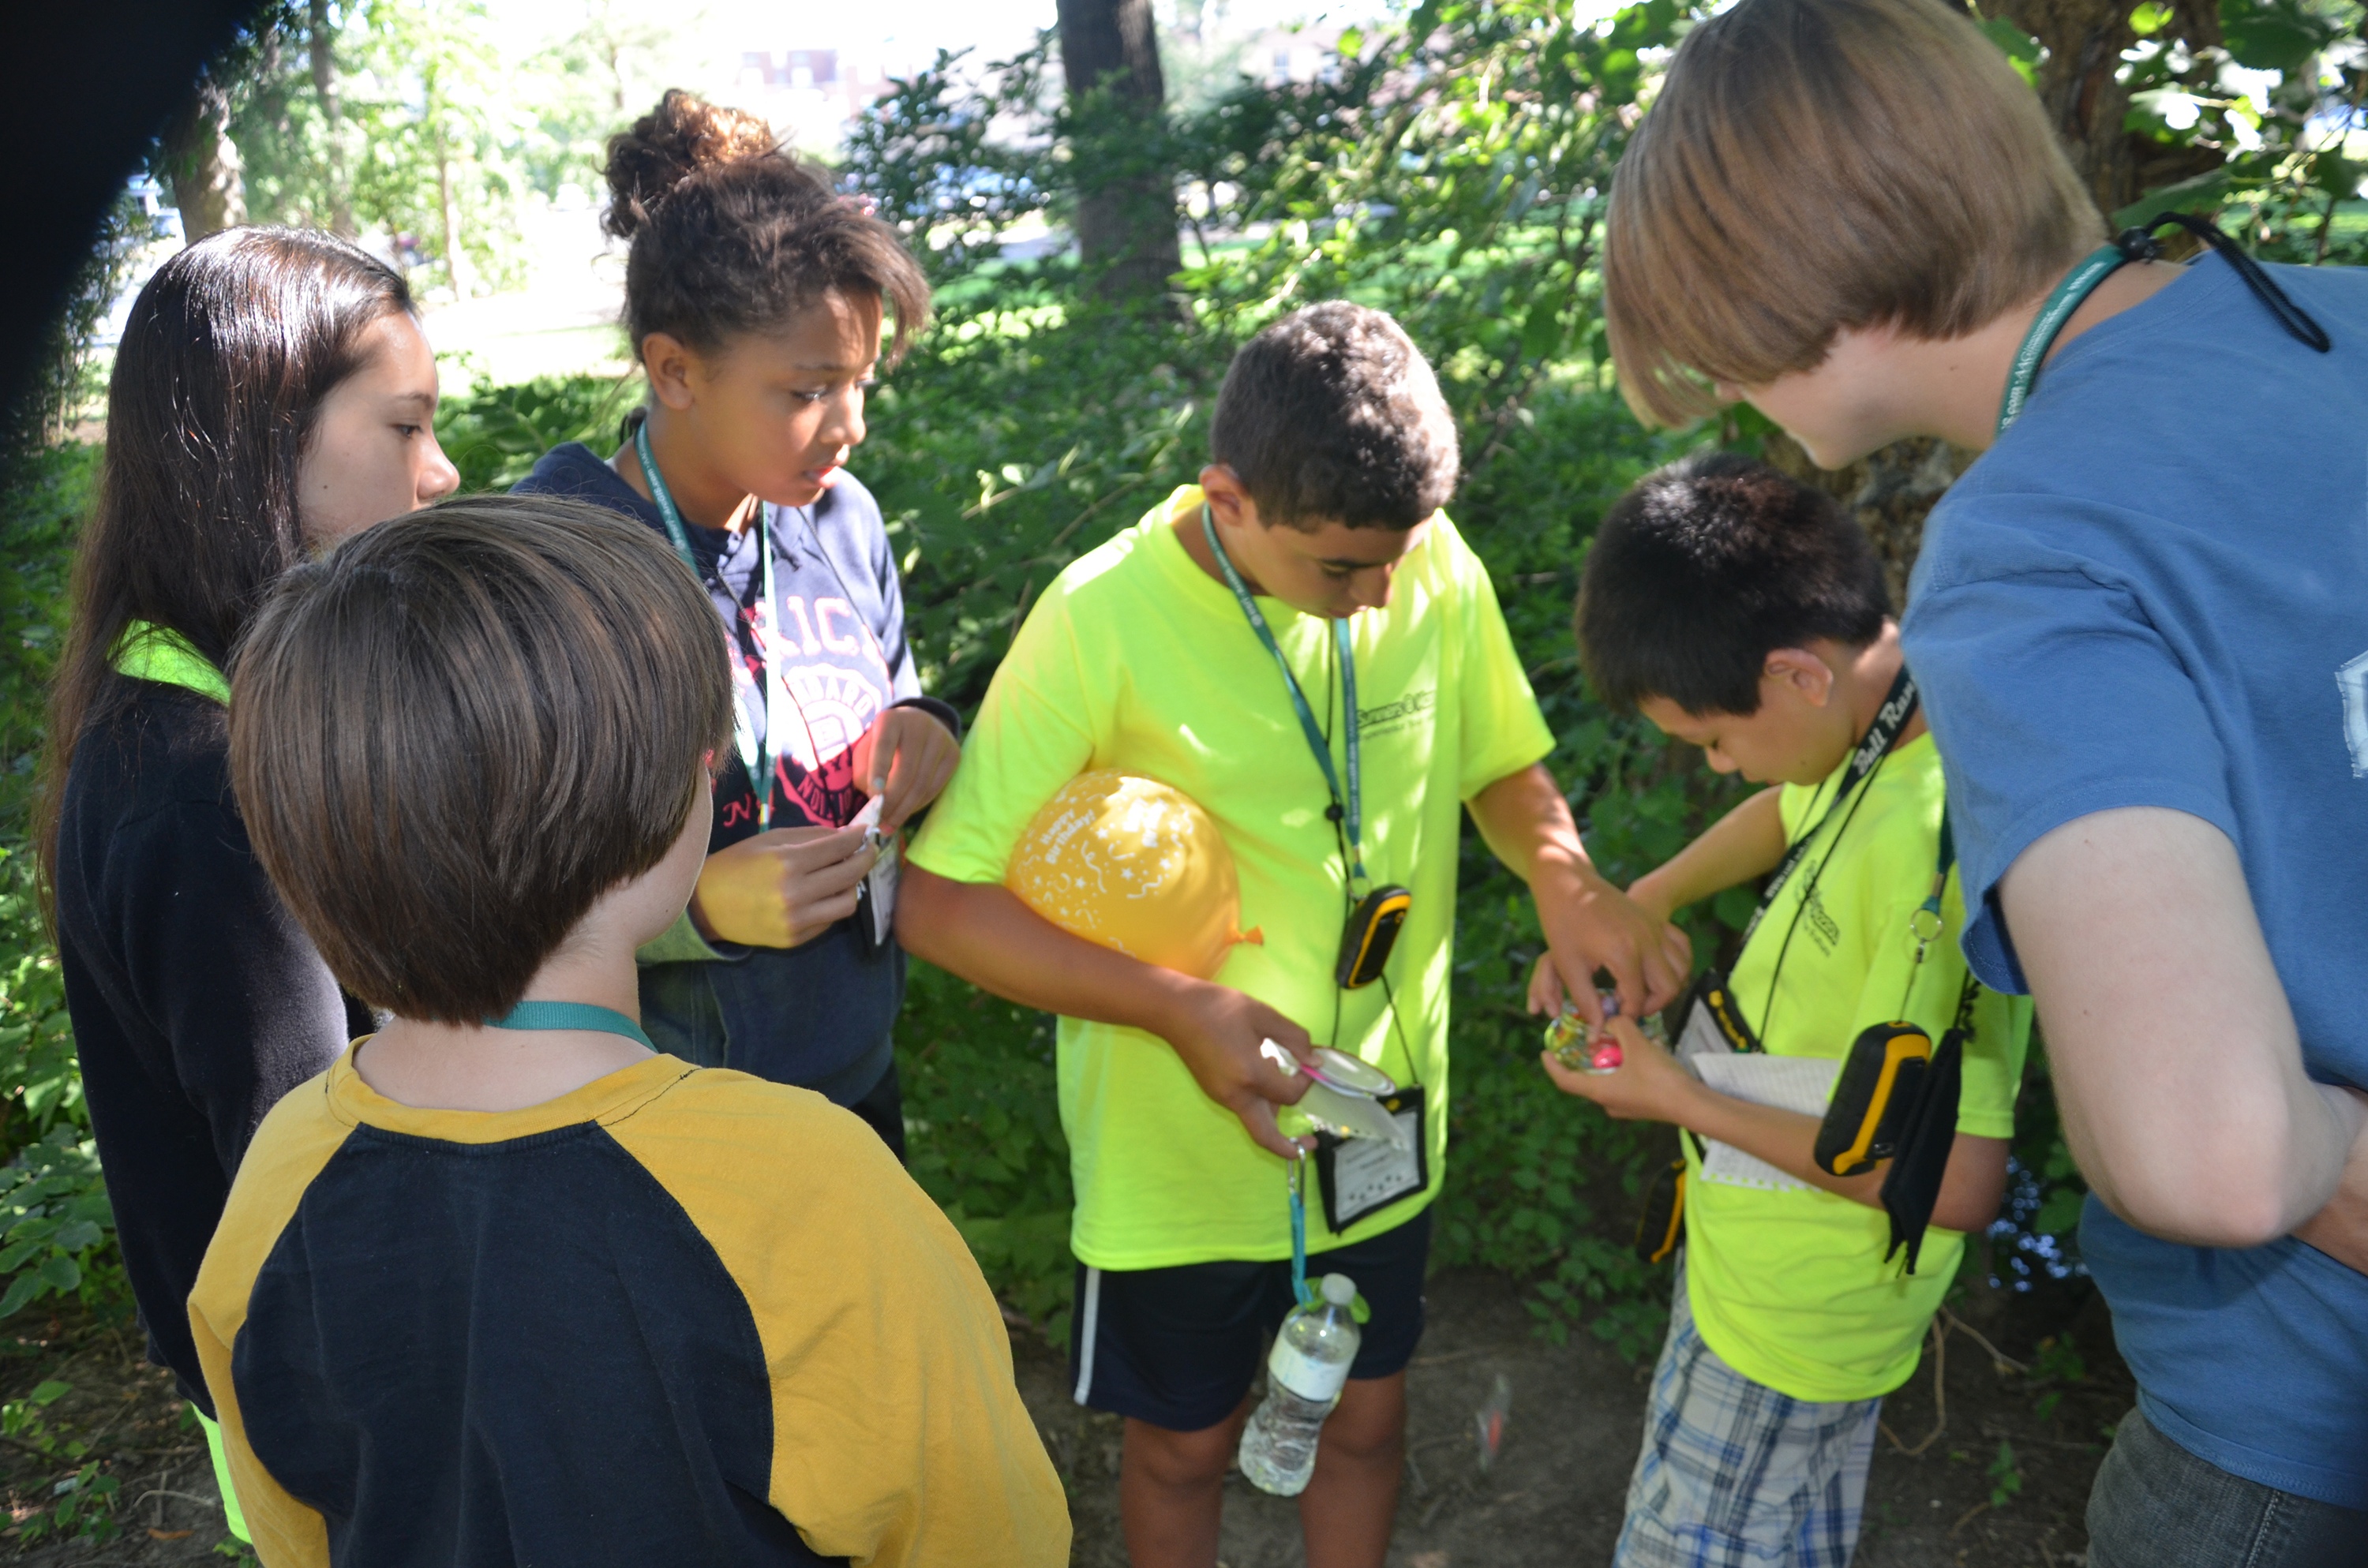 A group geochaches during the 4-H Summers at Mizzou GeoTech Summer camp. Photo by Shannon H. White, PhD